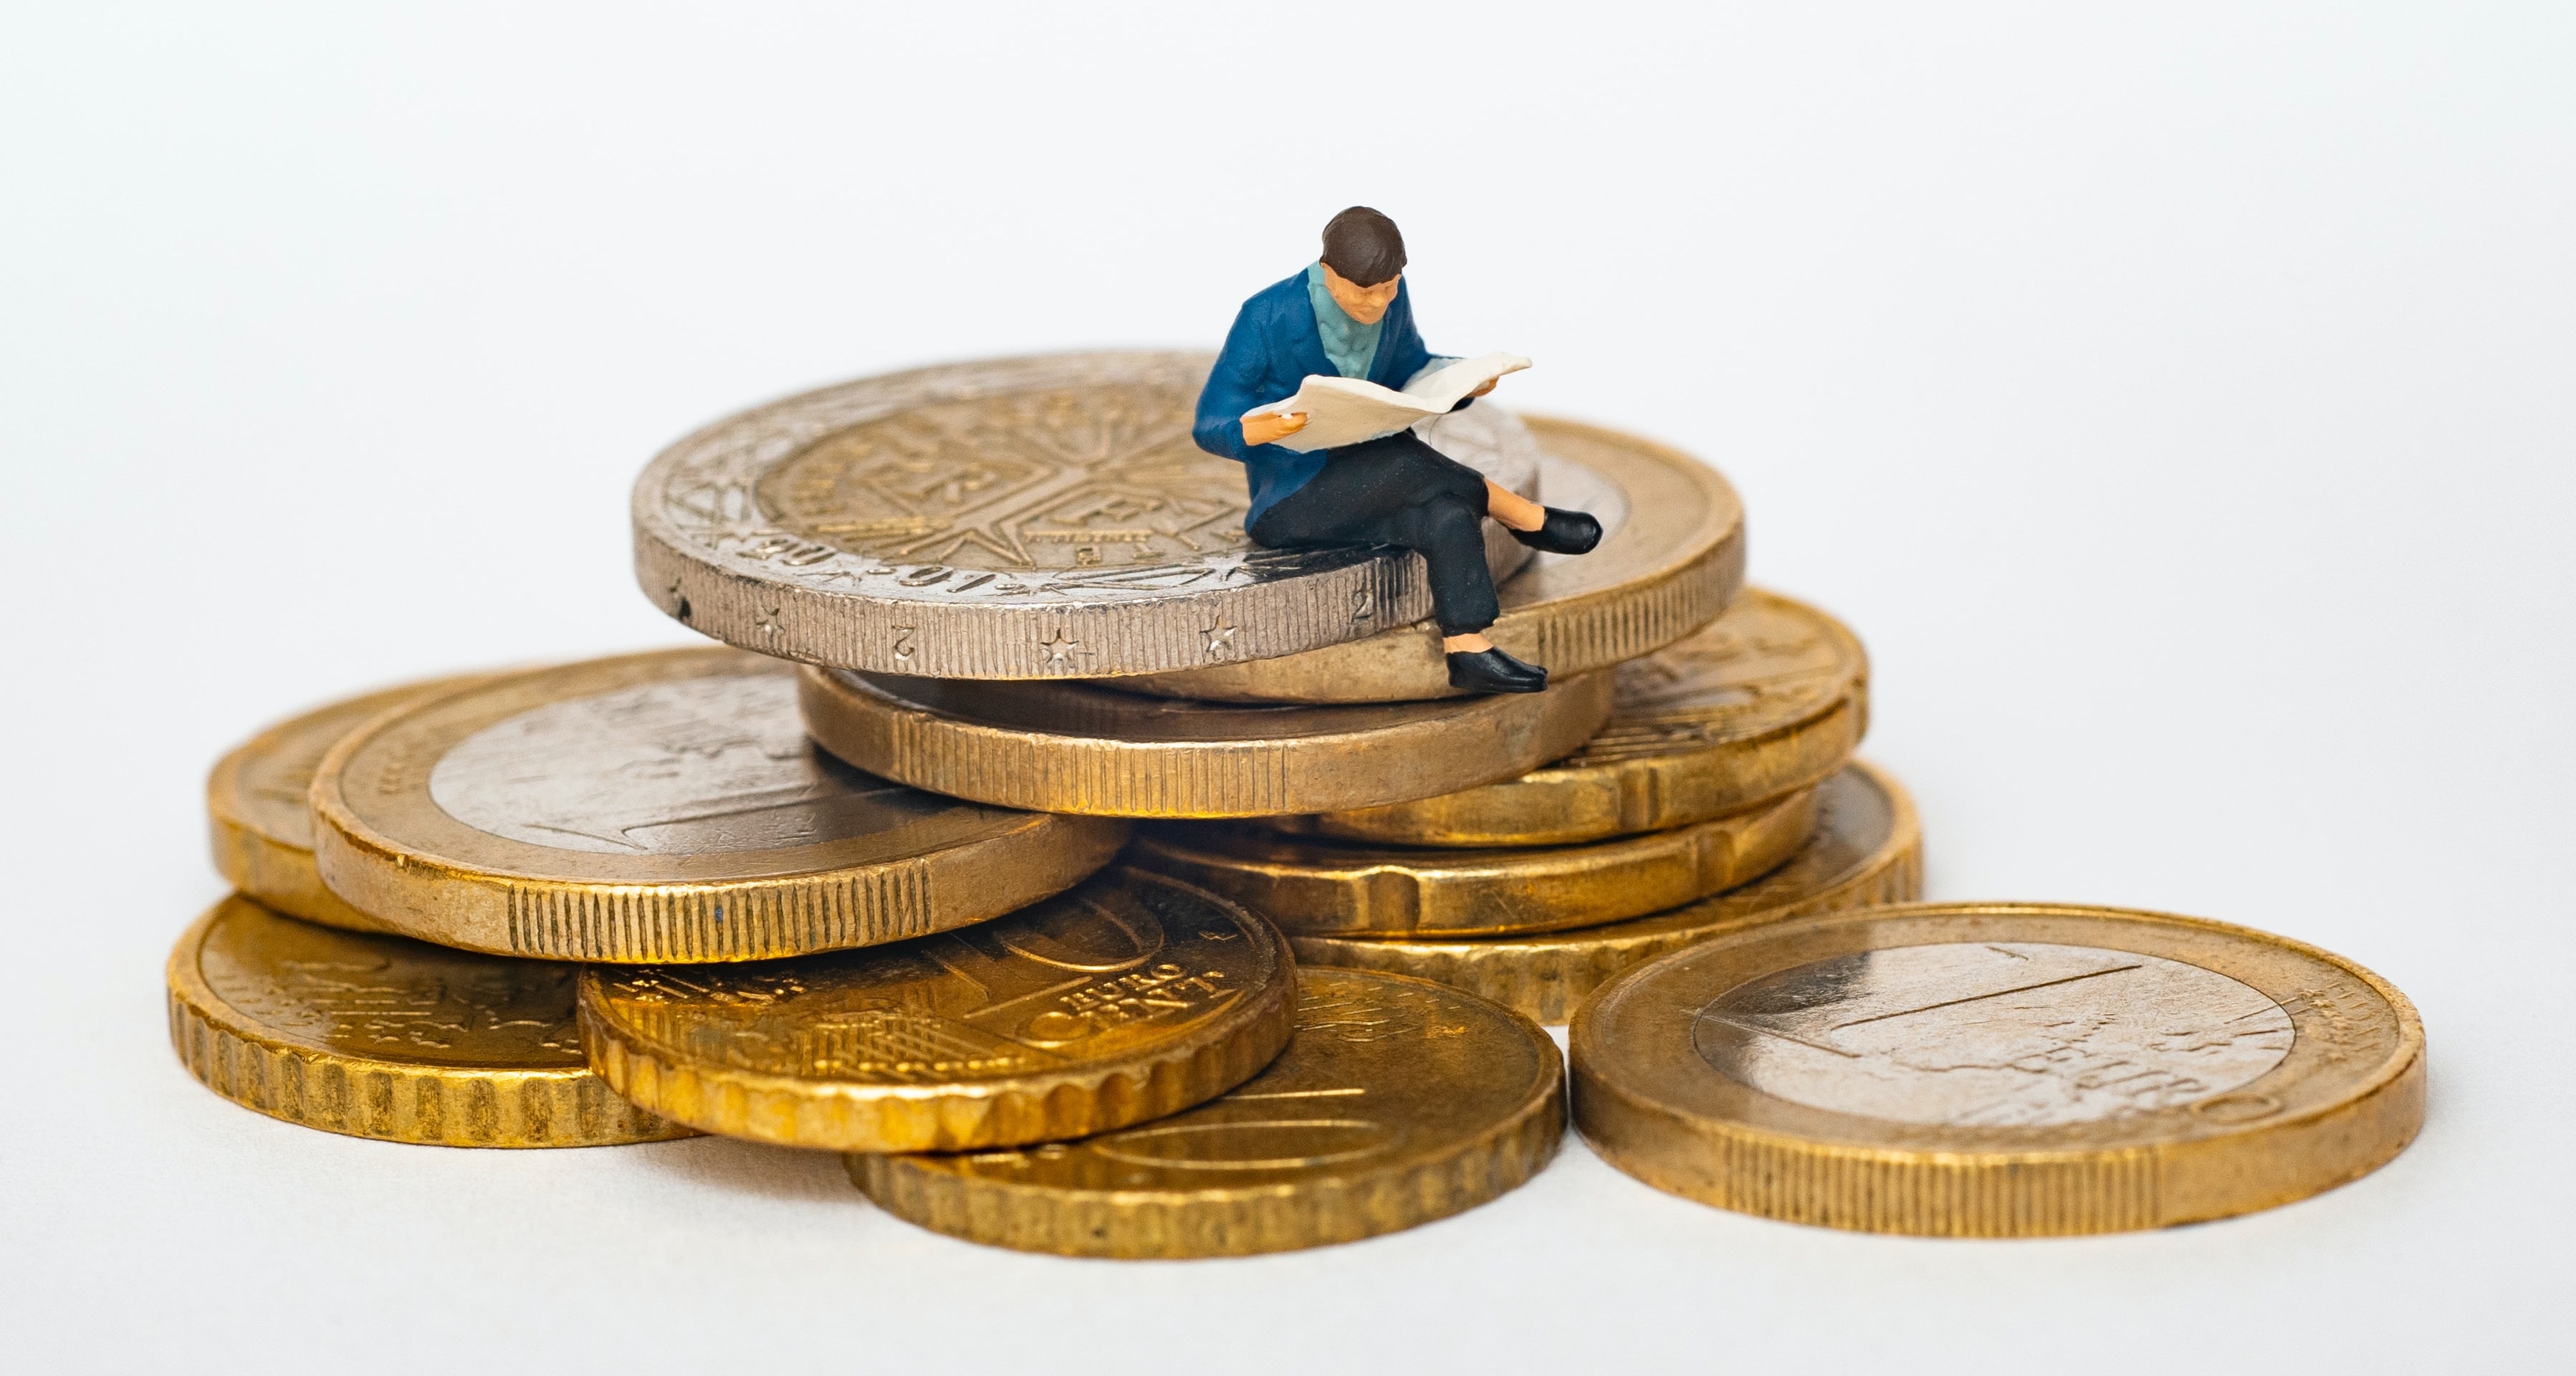 Person sitting on a pile of coins - achieving financial freedom or independence